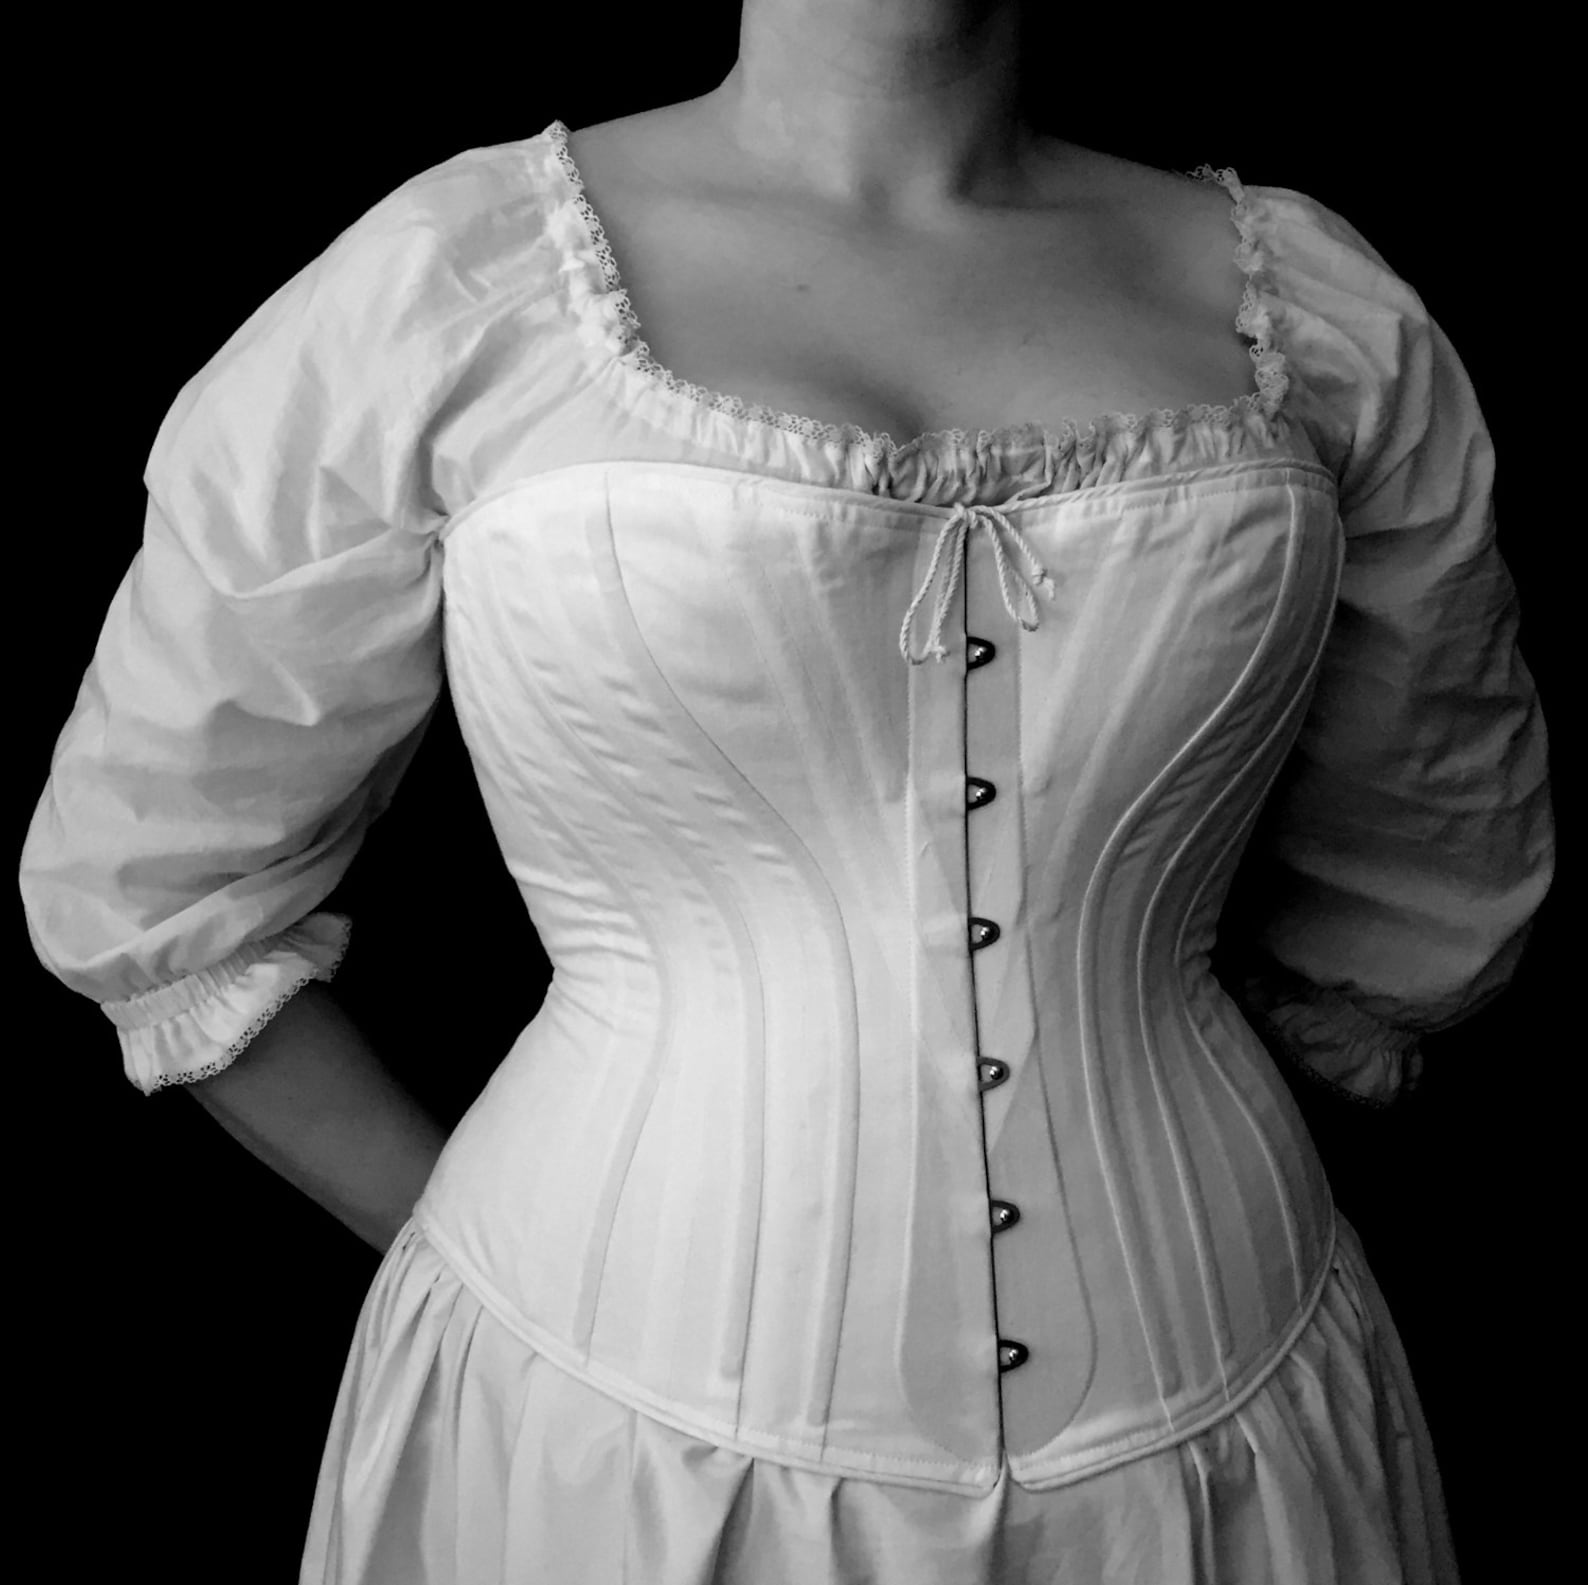 Victorian Corset Plus Size C. 1880 in Cotton Coutil or - Etsy